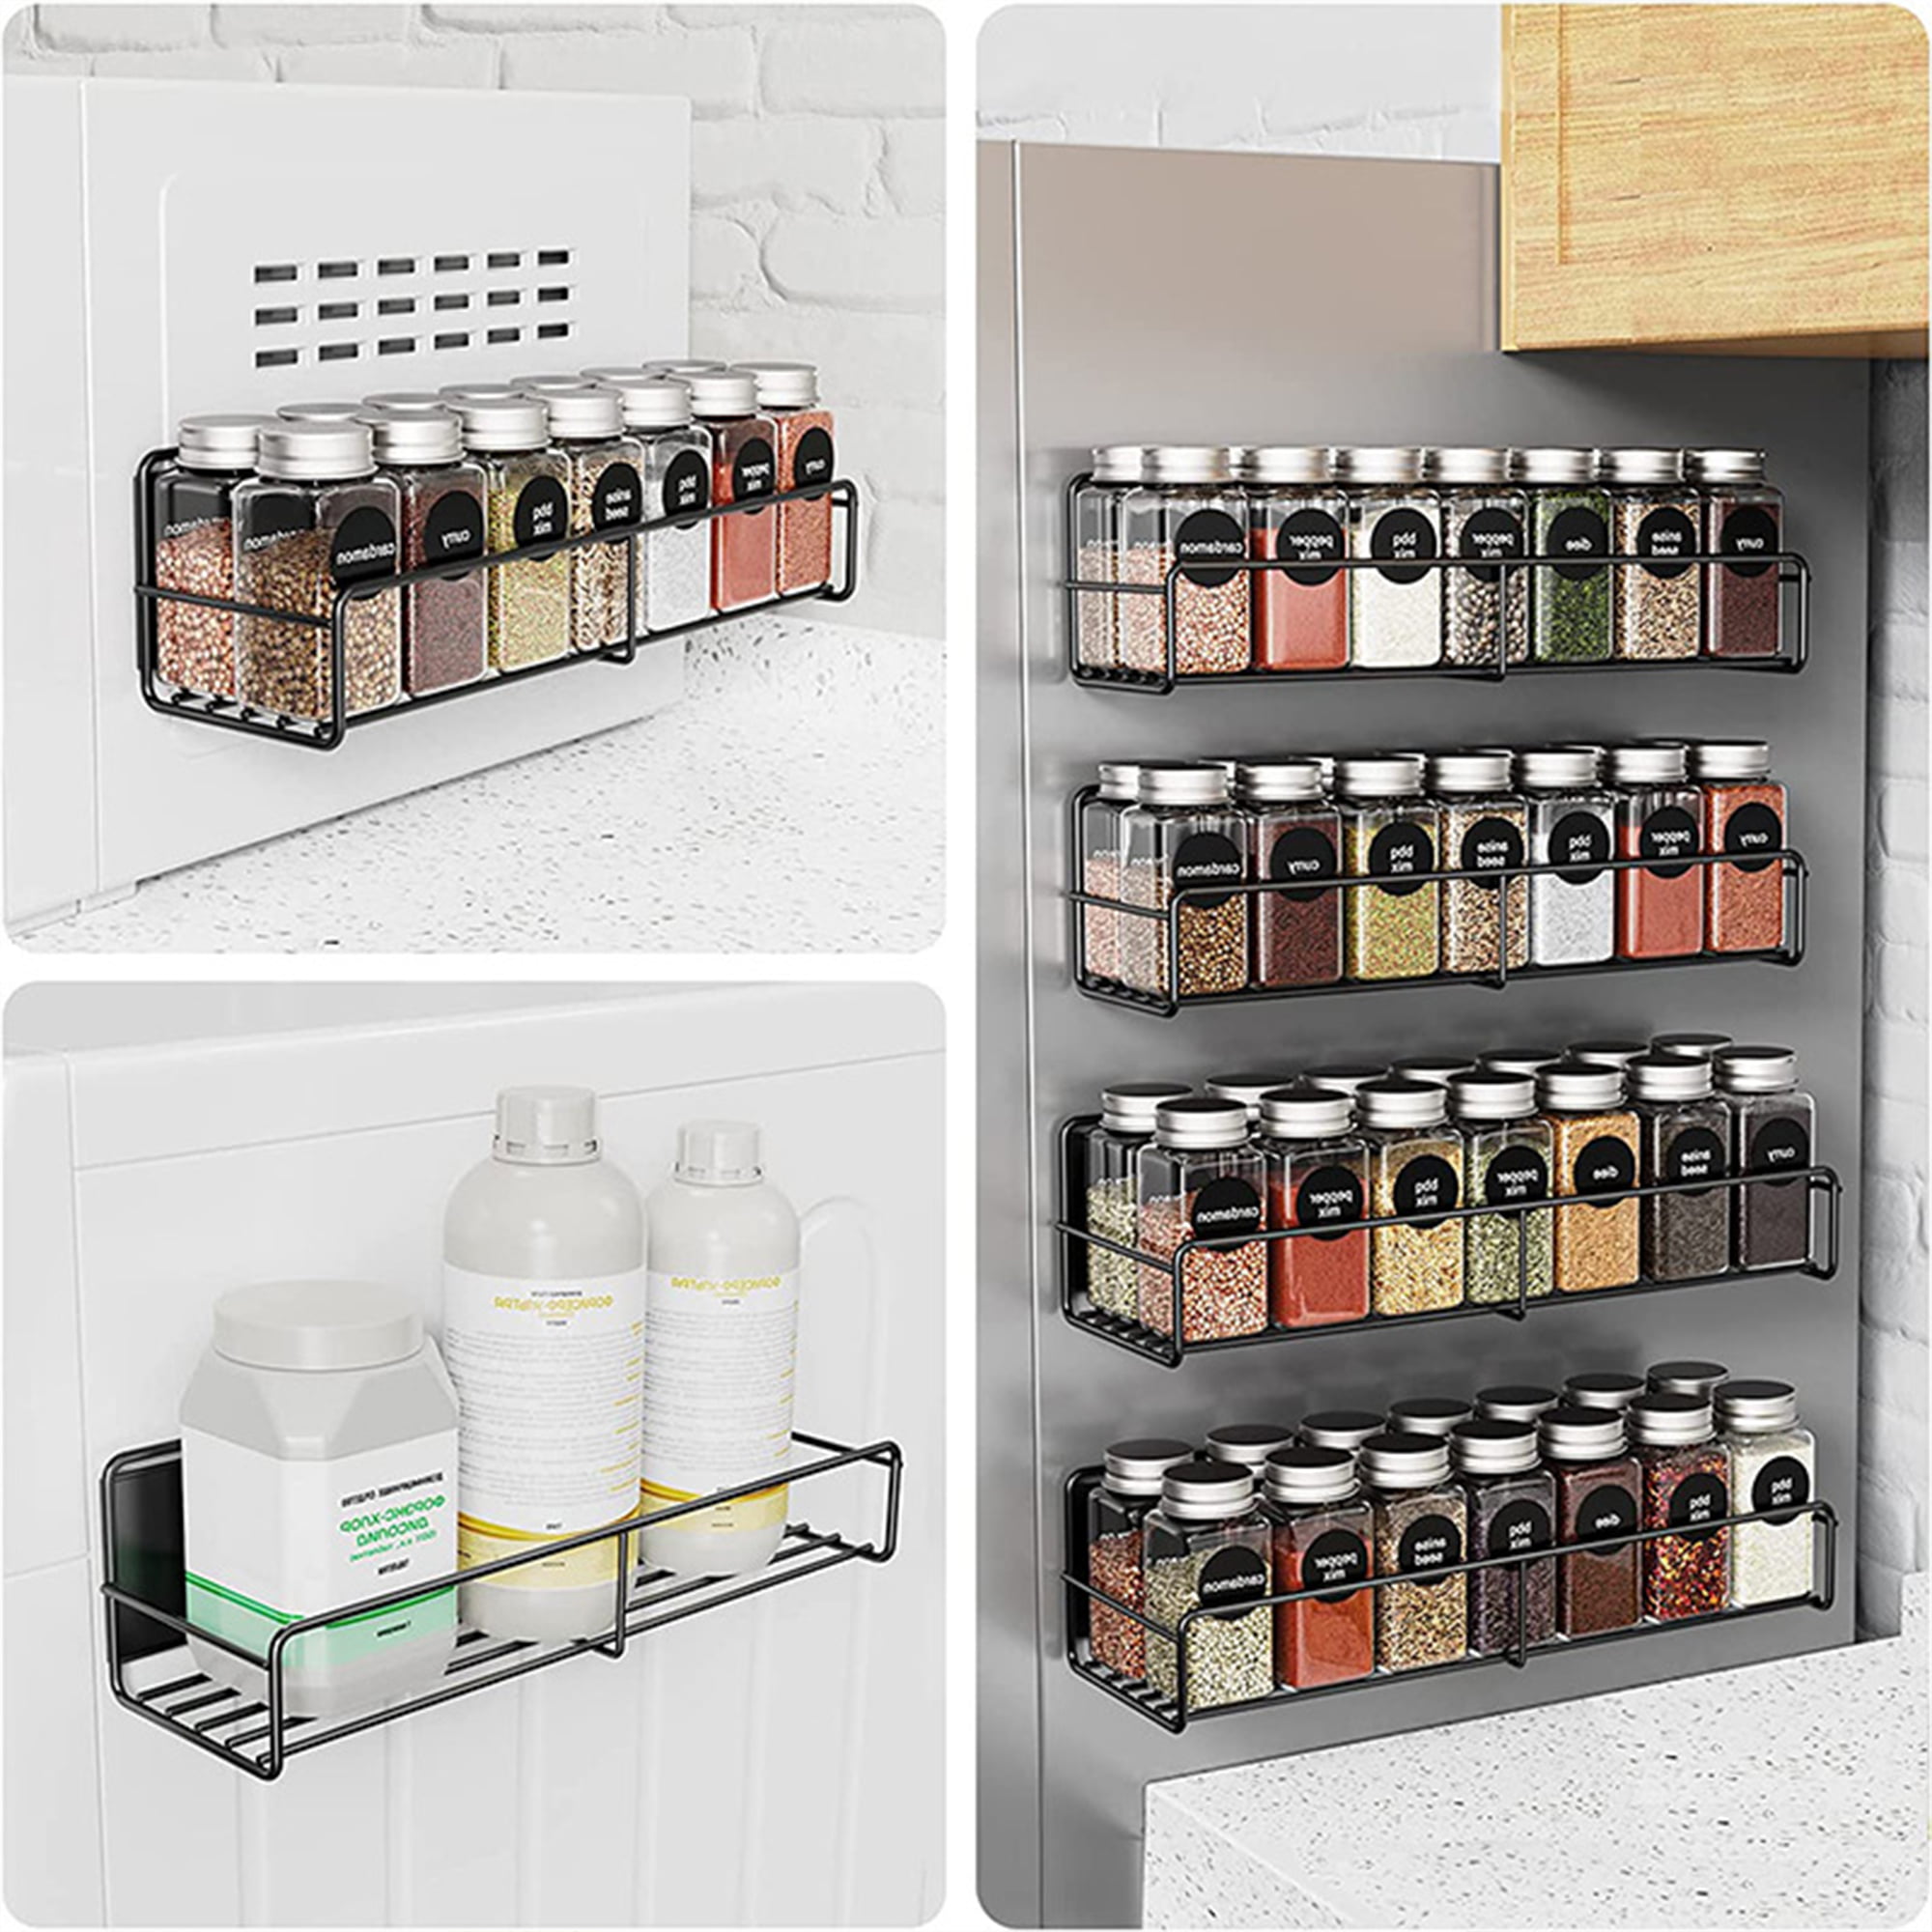  IFELS Spice Rack Organizer for Cabinet, 4 Tier Seasoning  Organizer, Expandable Shelf,Step Storage Holder, Kitchen Cabinet  Countertop,with Protection Railing, Metal (Black,2 PC) : Home & Kitchen